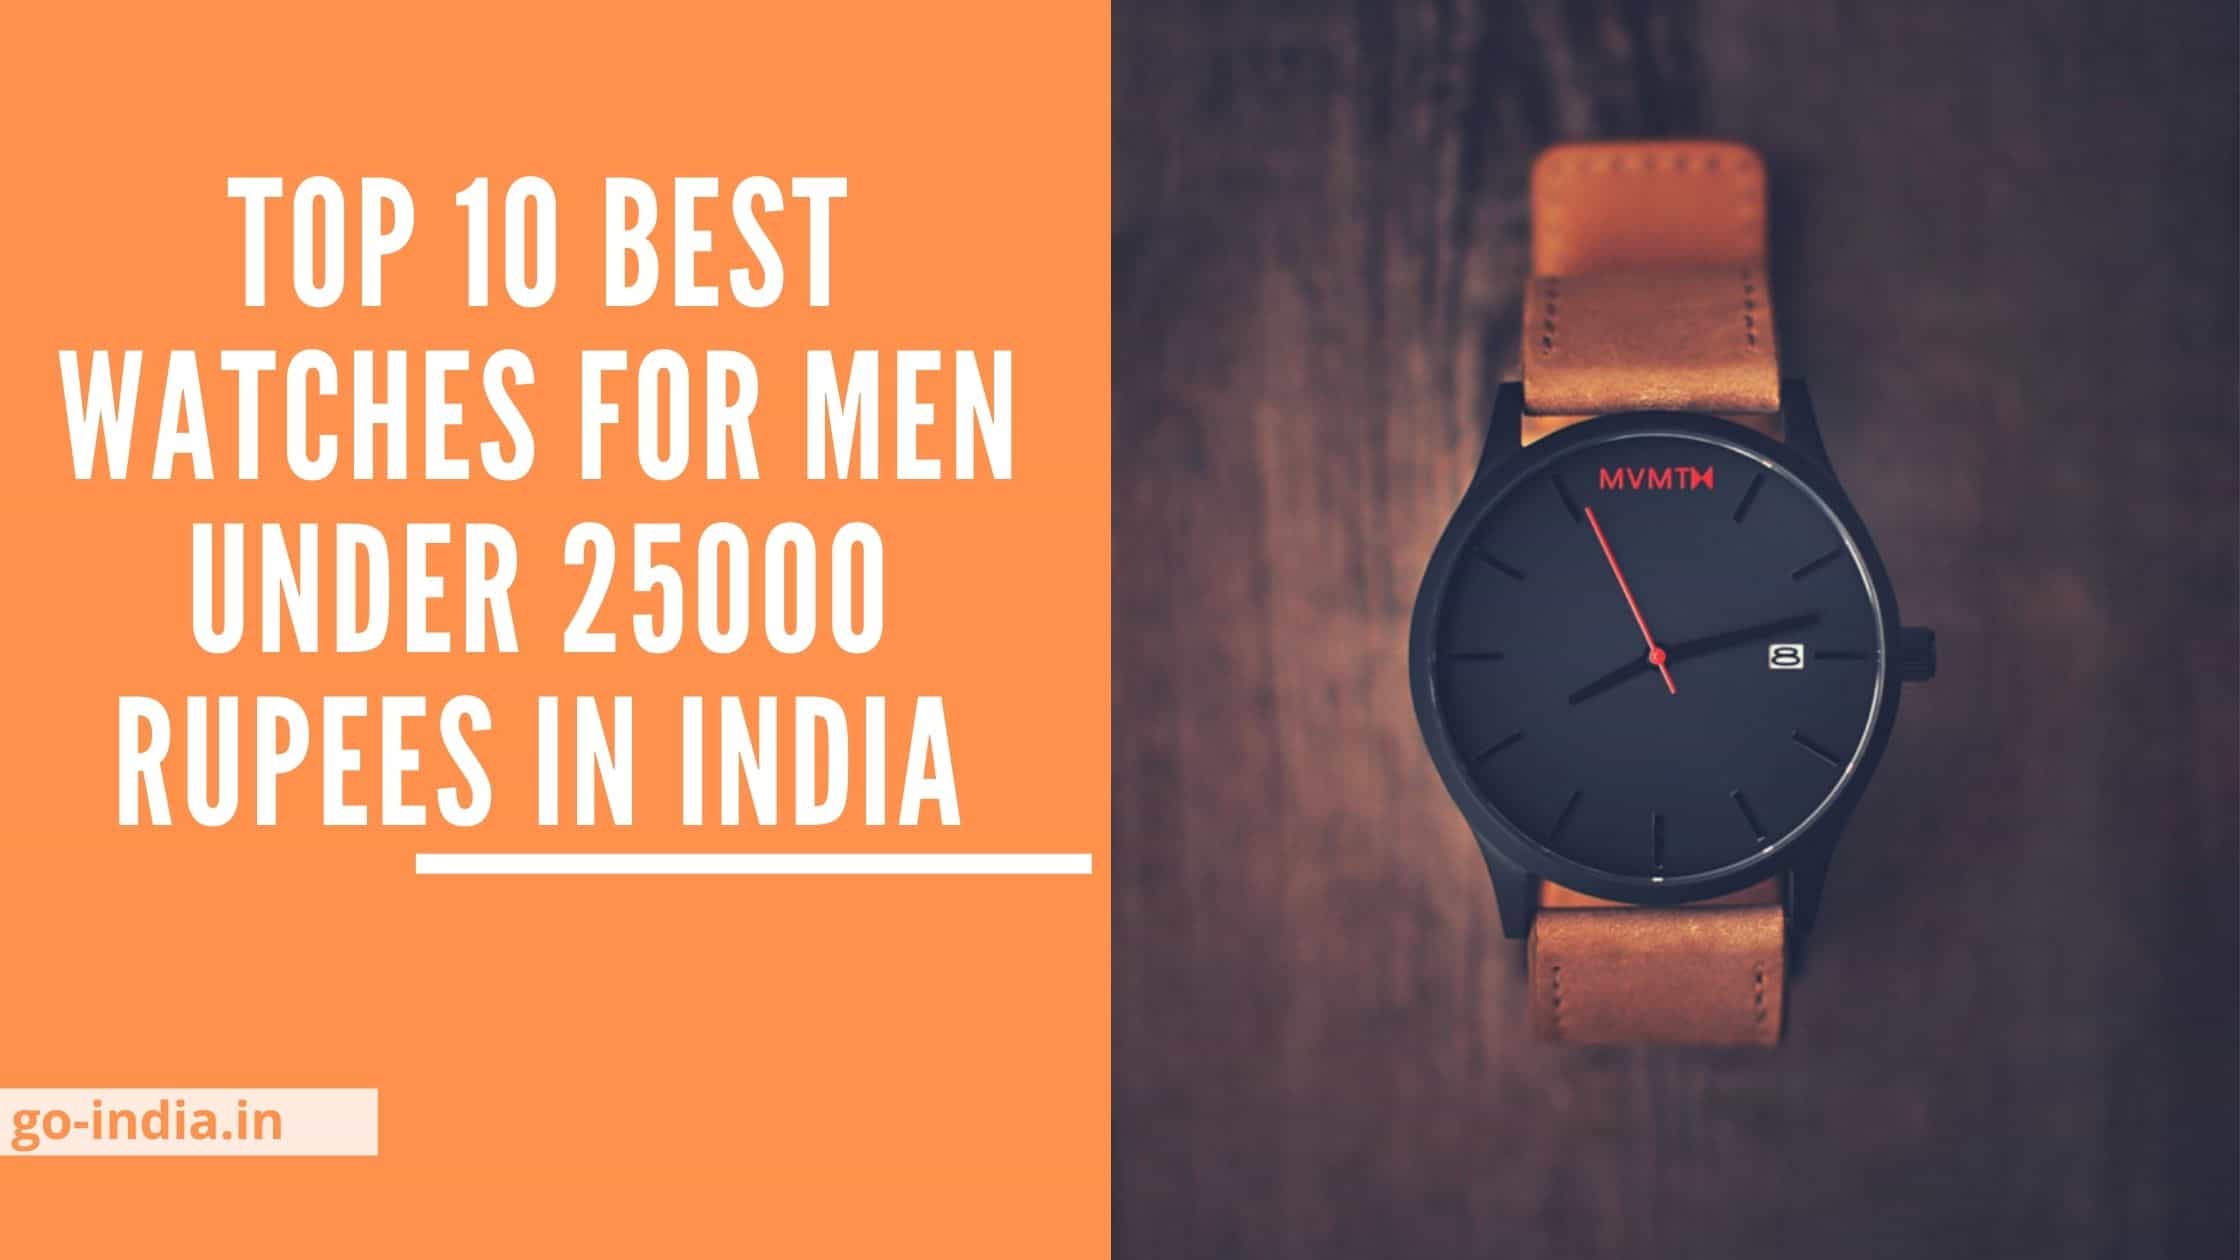 Top 10 Best Watches For Men Under 25000 Rupees in India